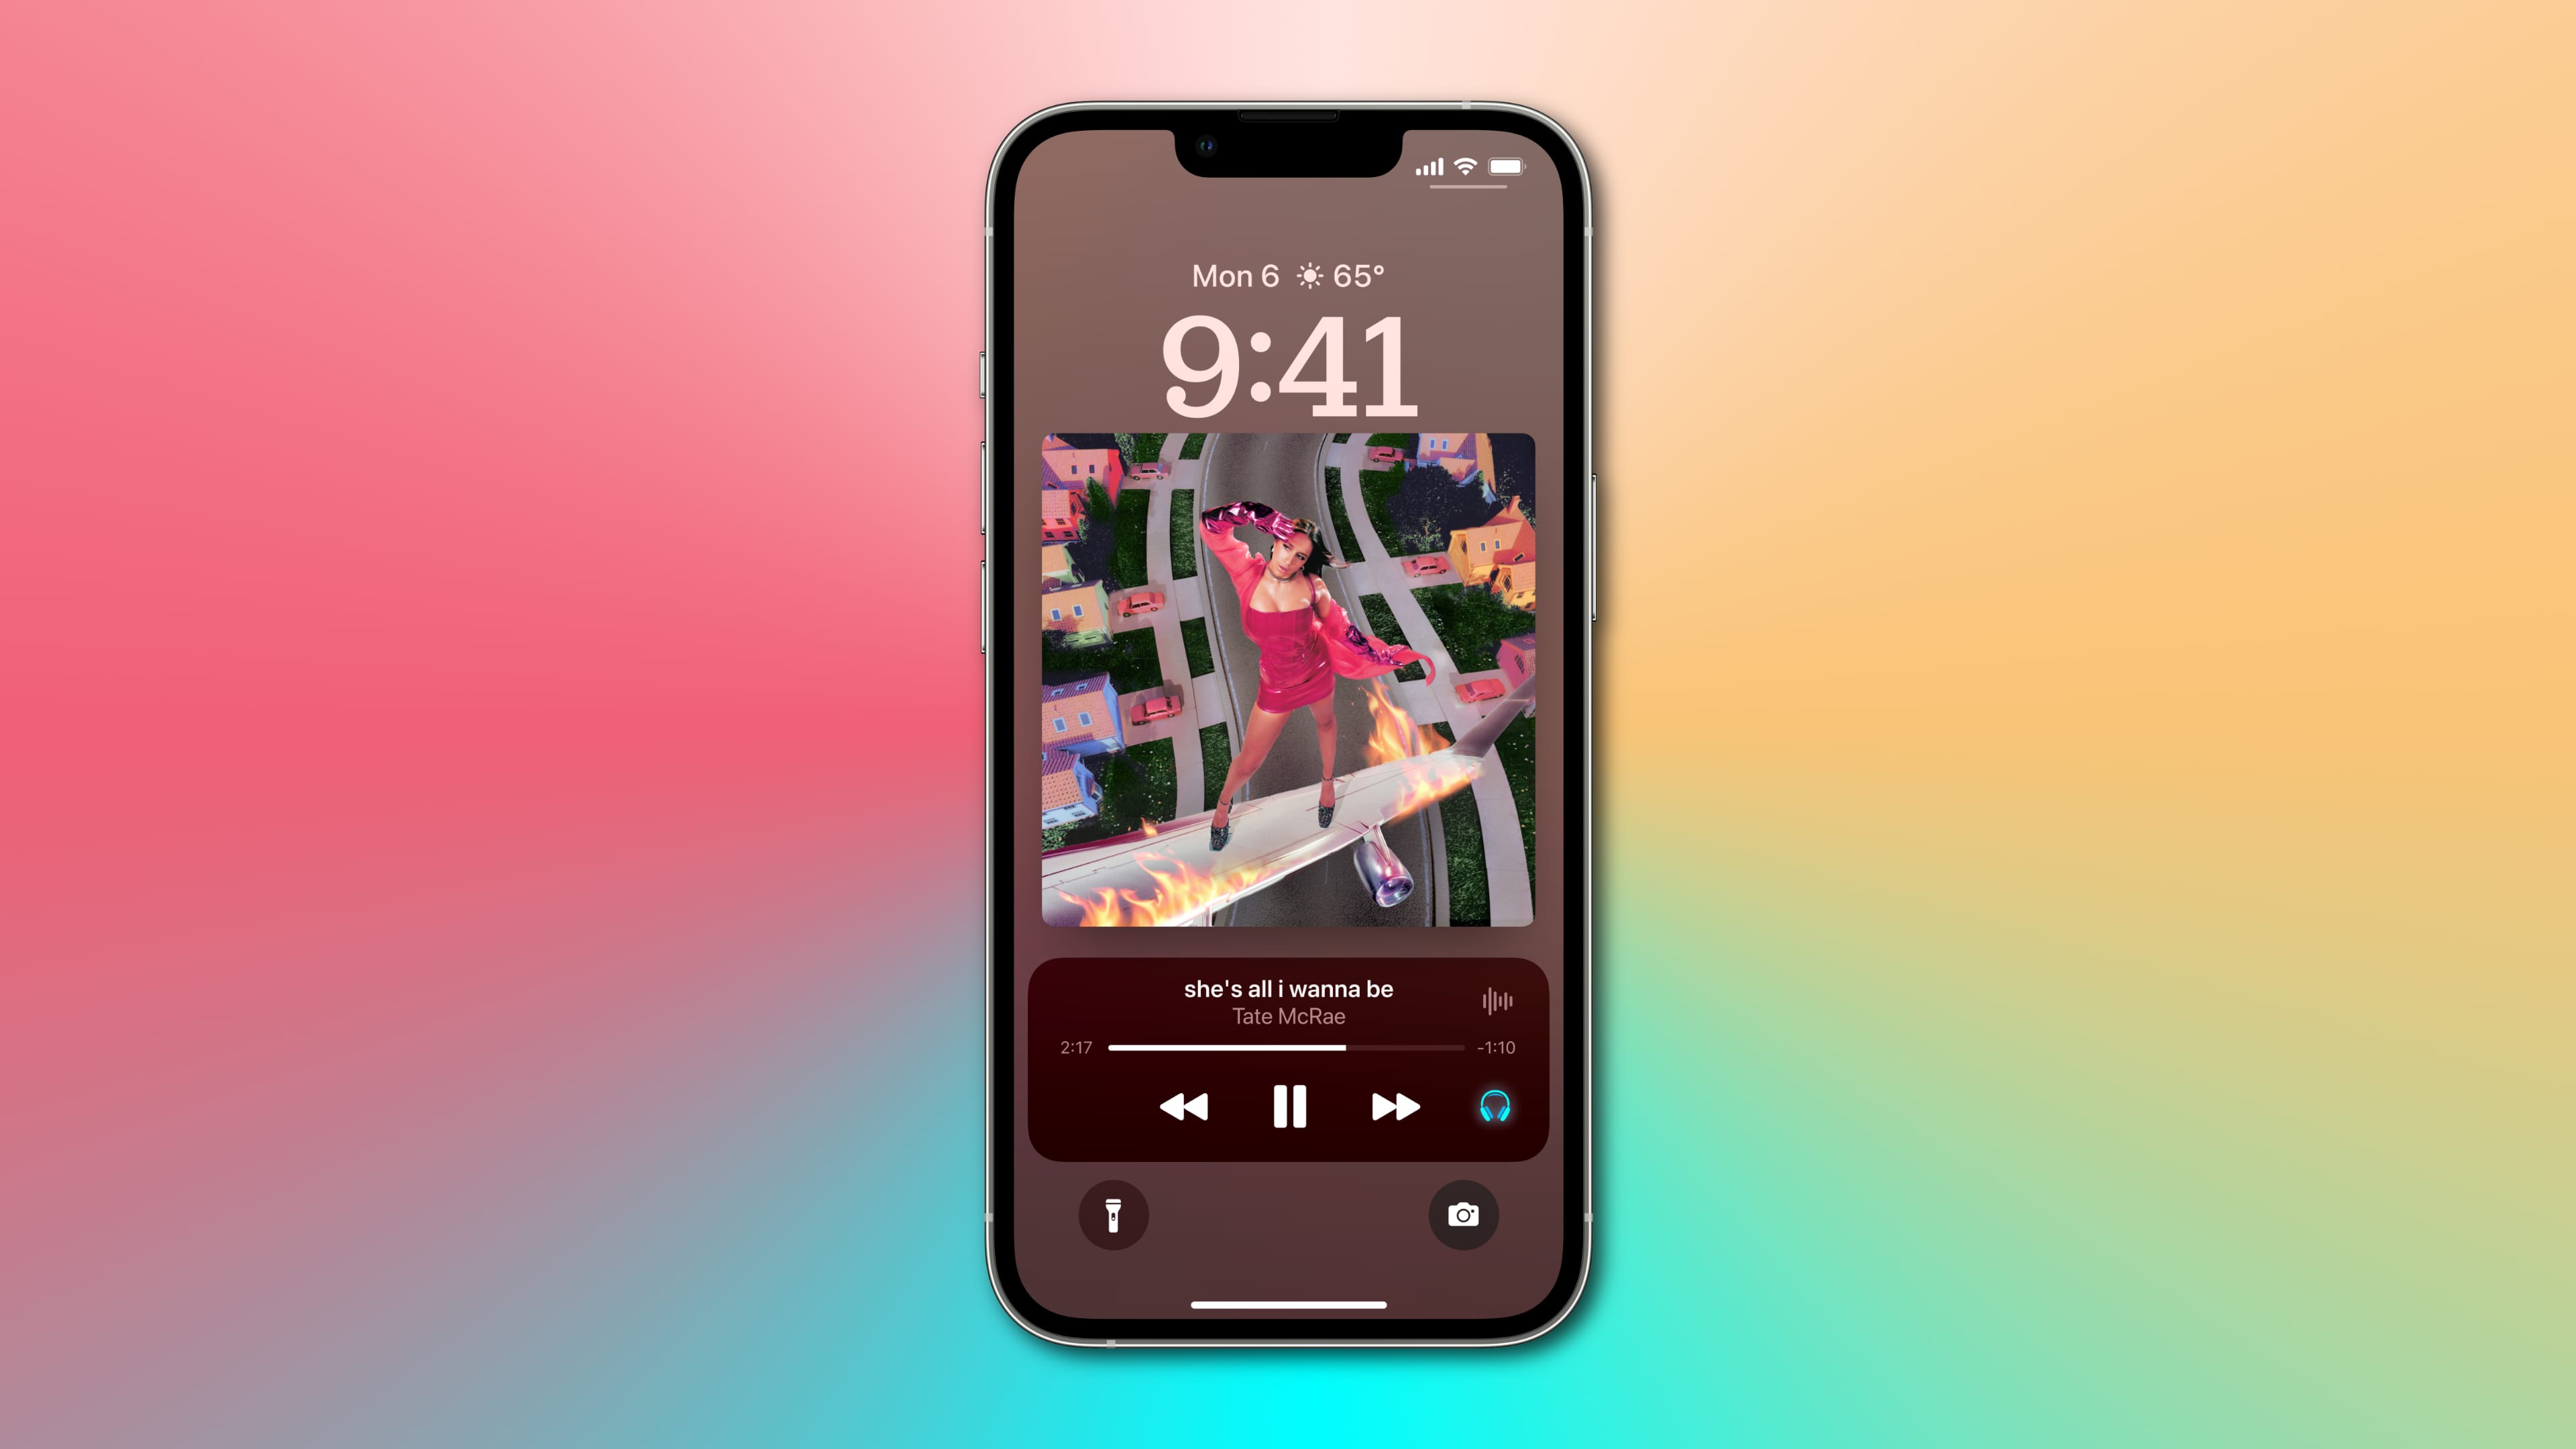 iPhone screenshot showcasing expanding the Now Playing control to a fullscreen view on the lock screen thanks to the Live Activities feature